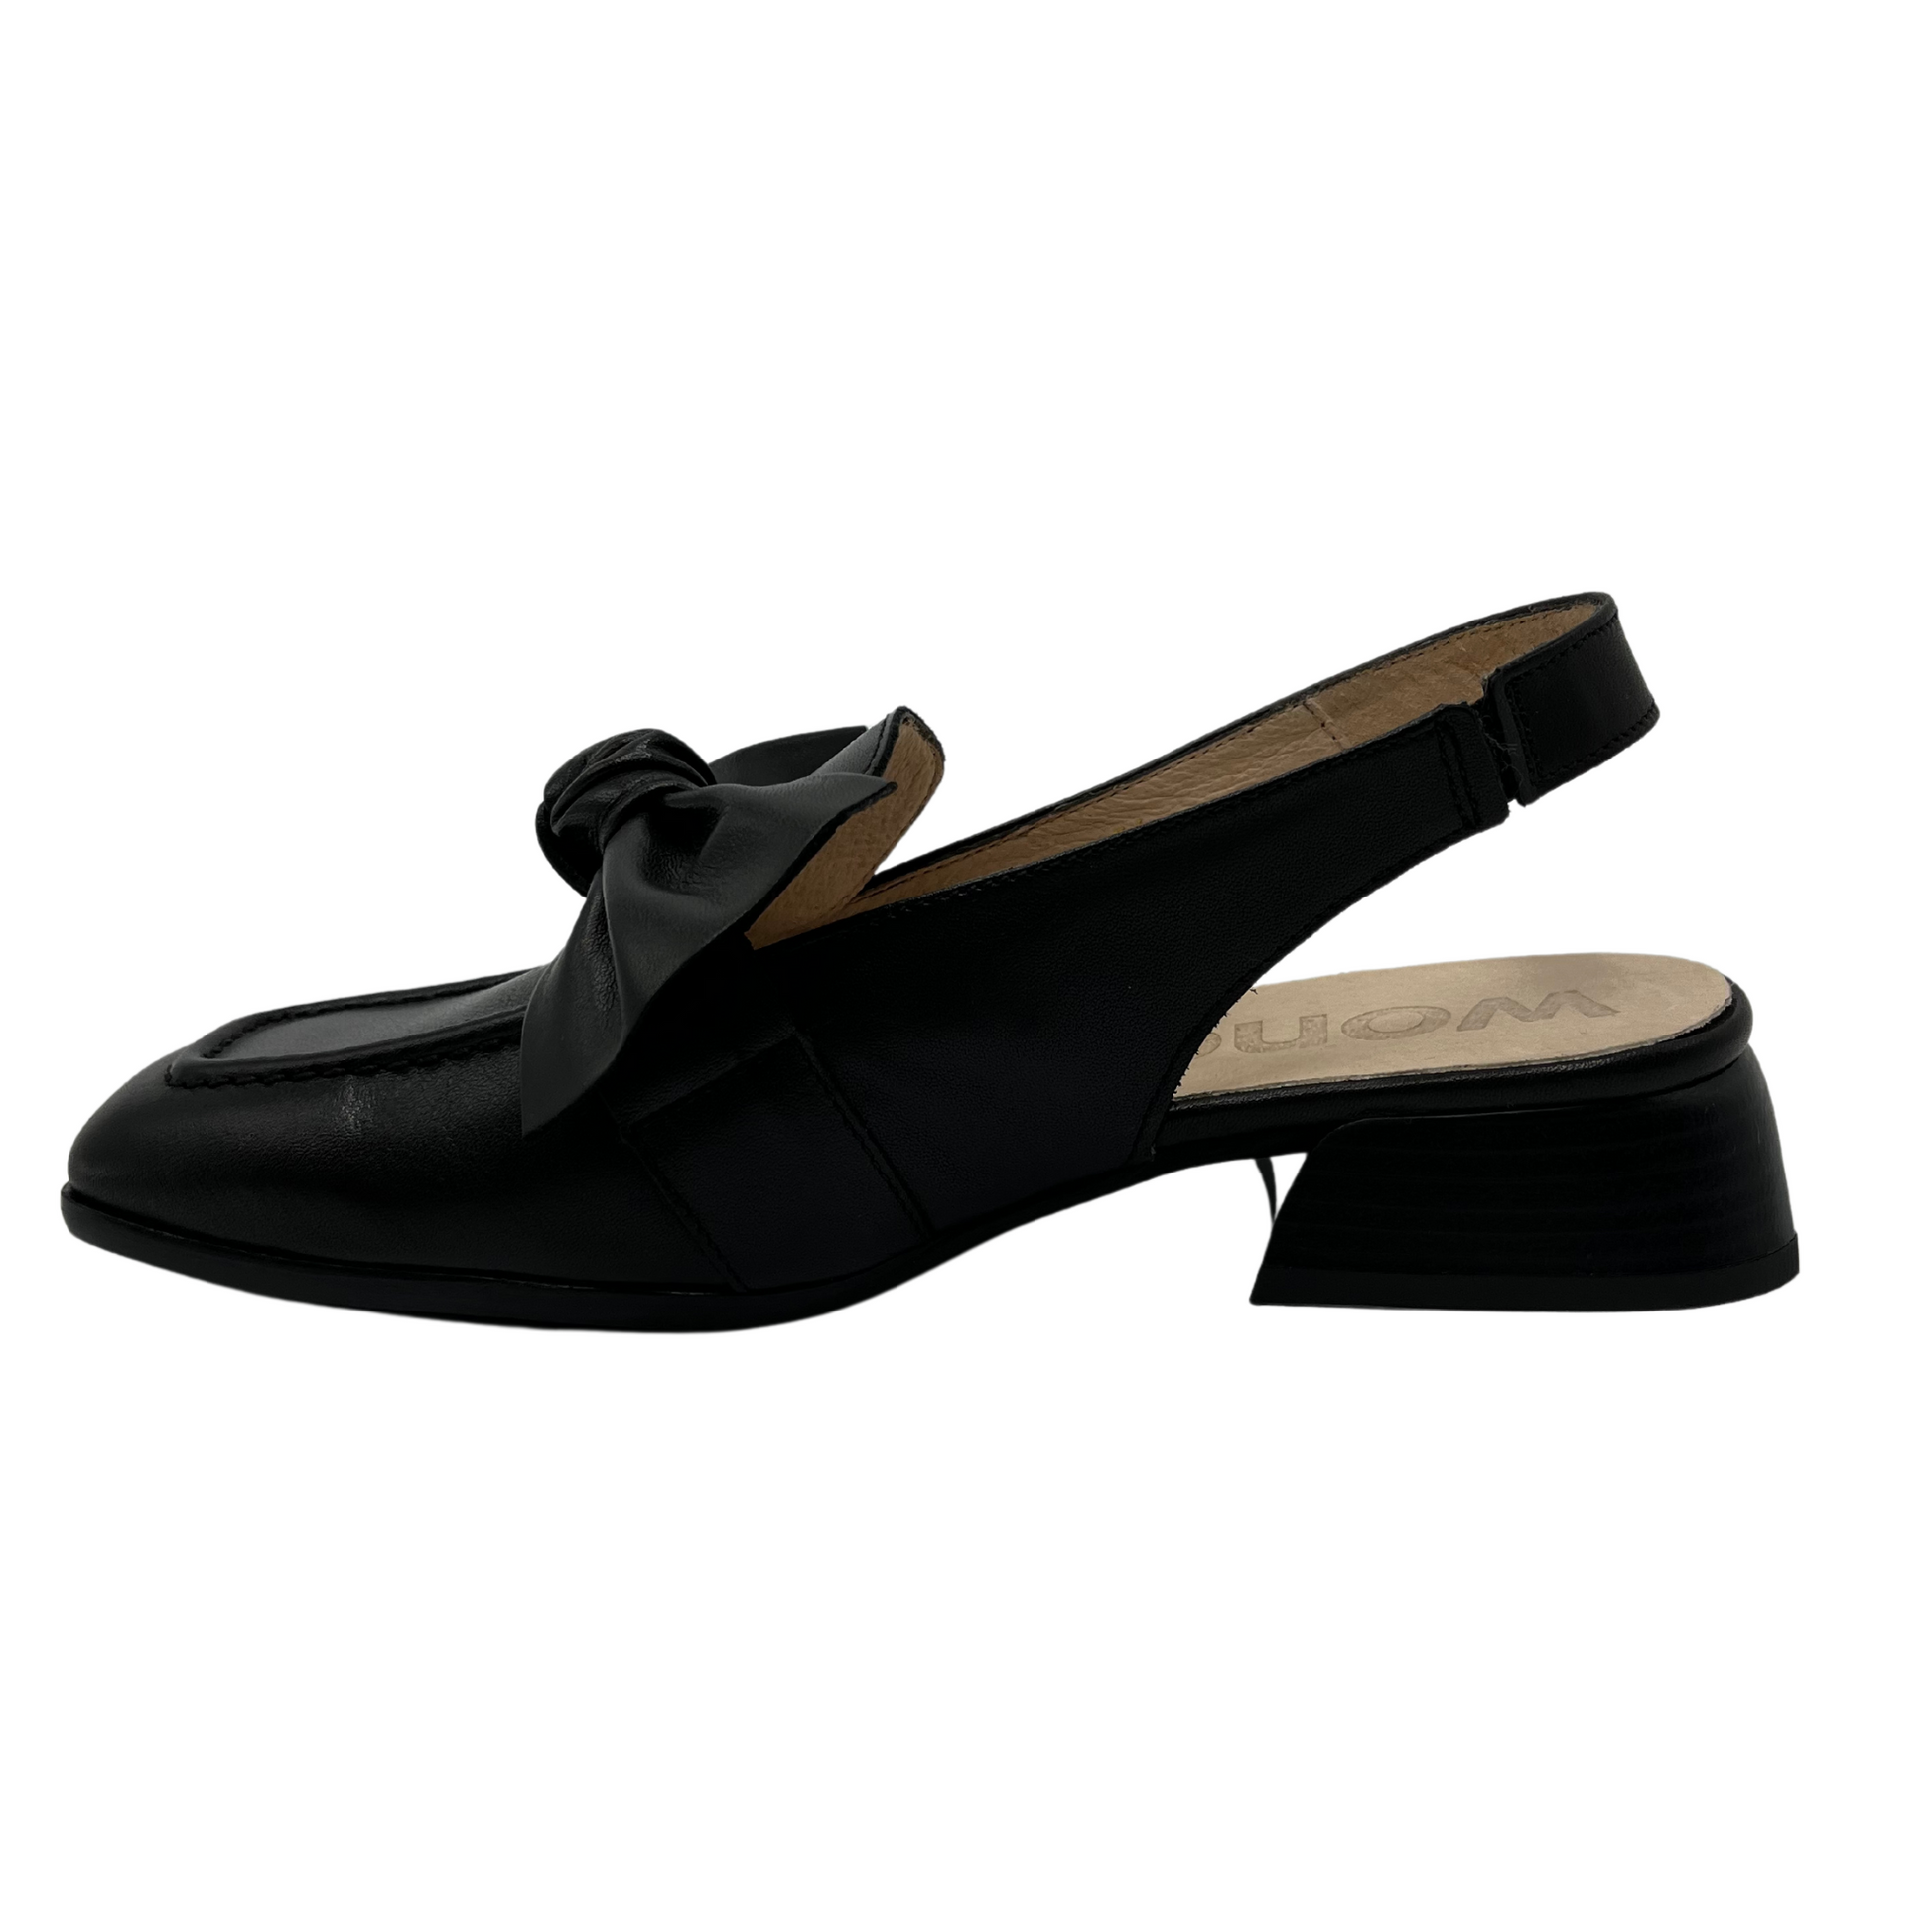 Left view of black leather slingback loafer with knotted bow detail and square toe